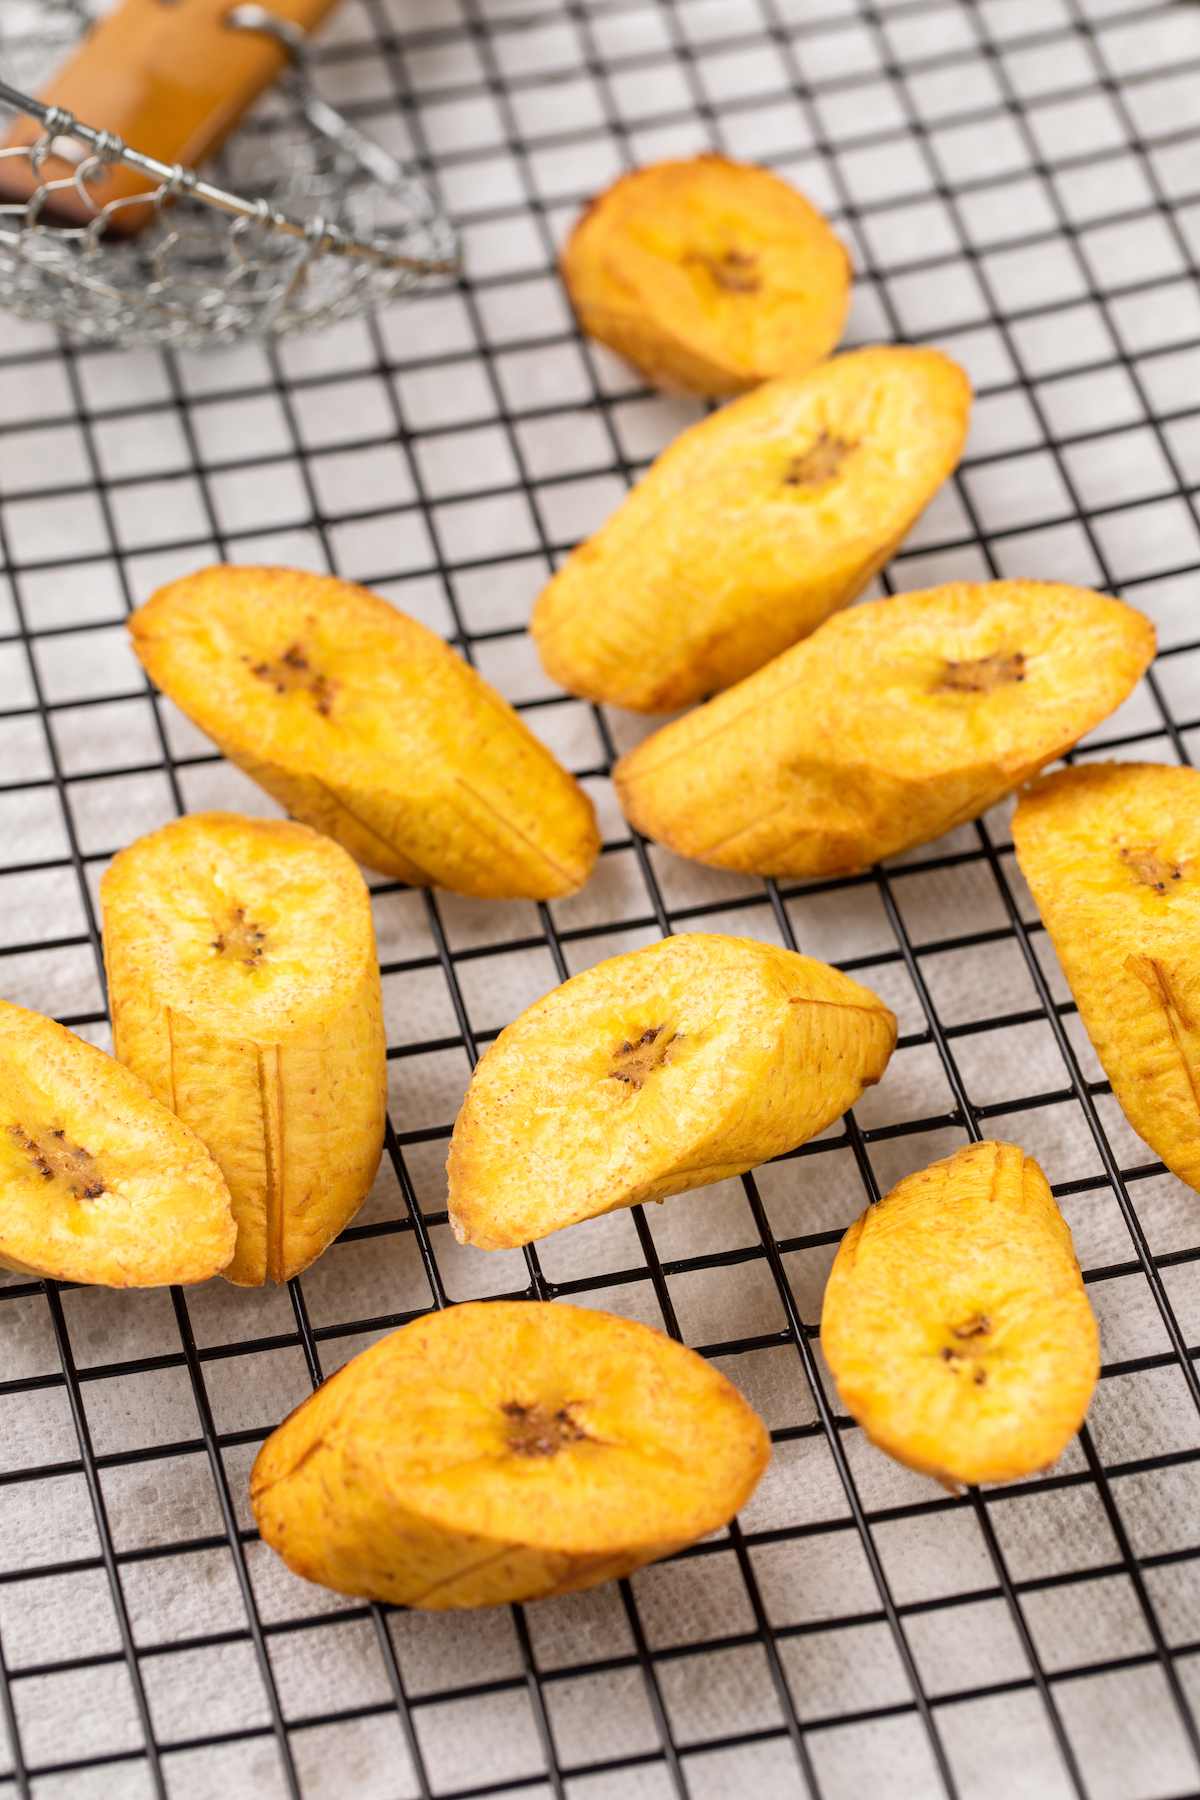 Plantain pieces fried and draining on a cooling rack.